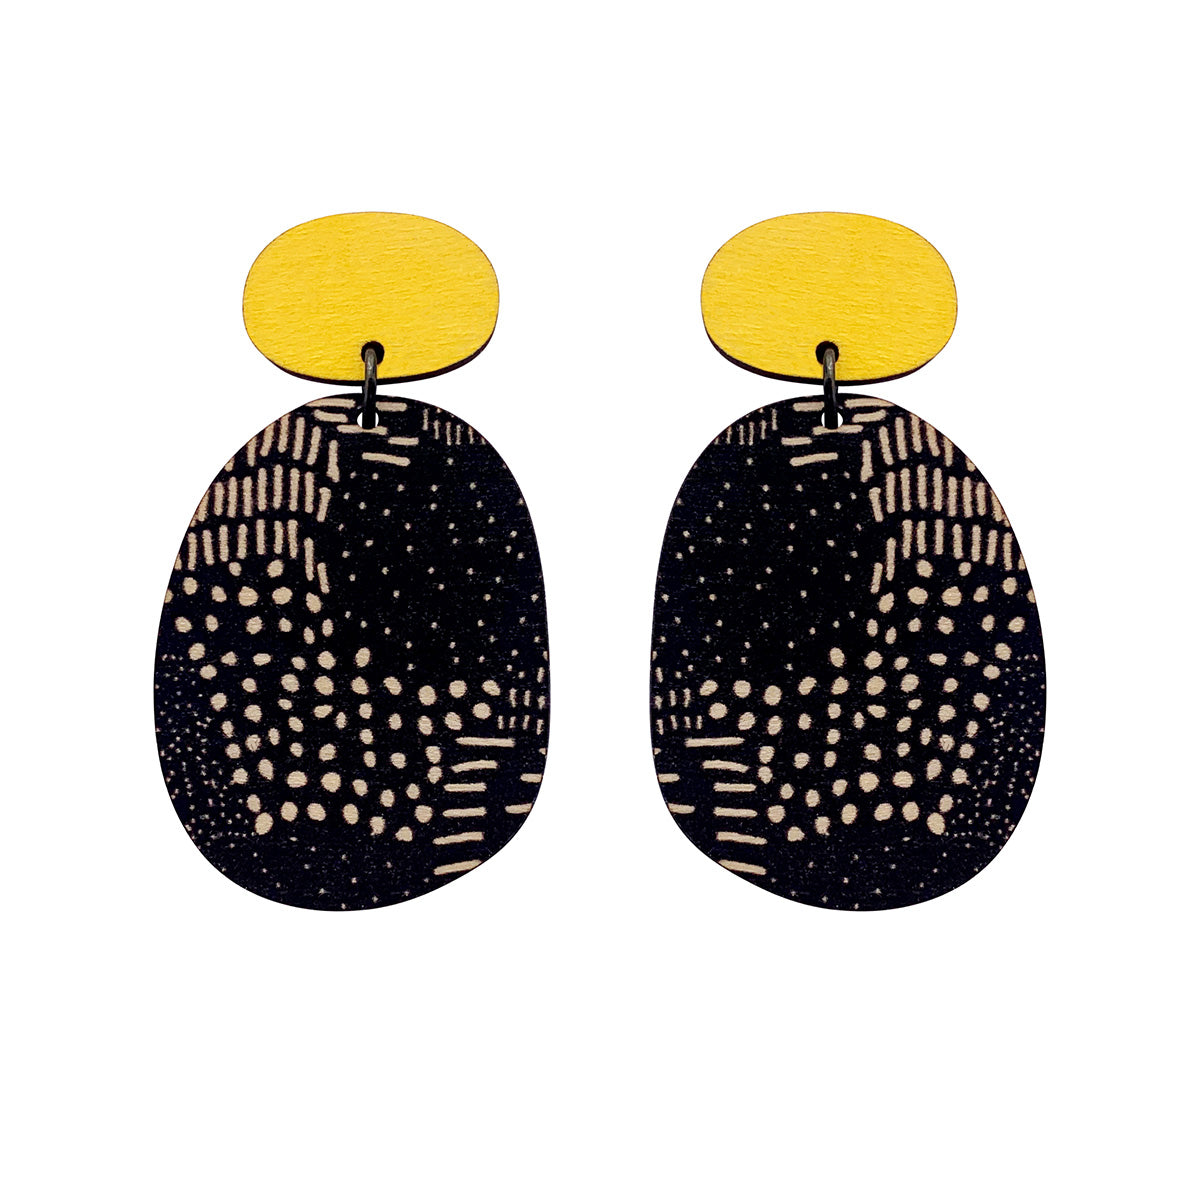 Double layer earrings in yellow and Night Garden pattern